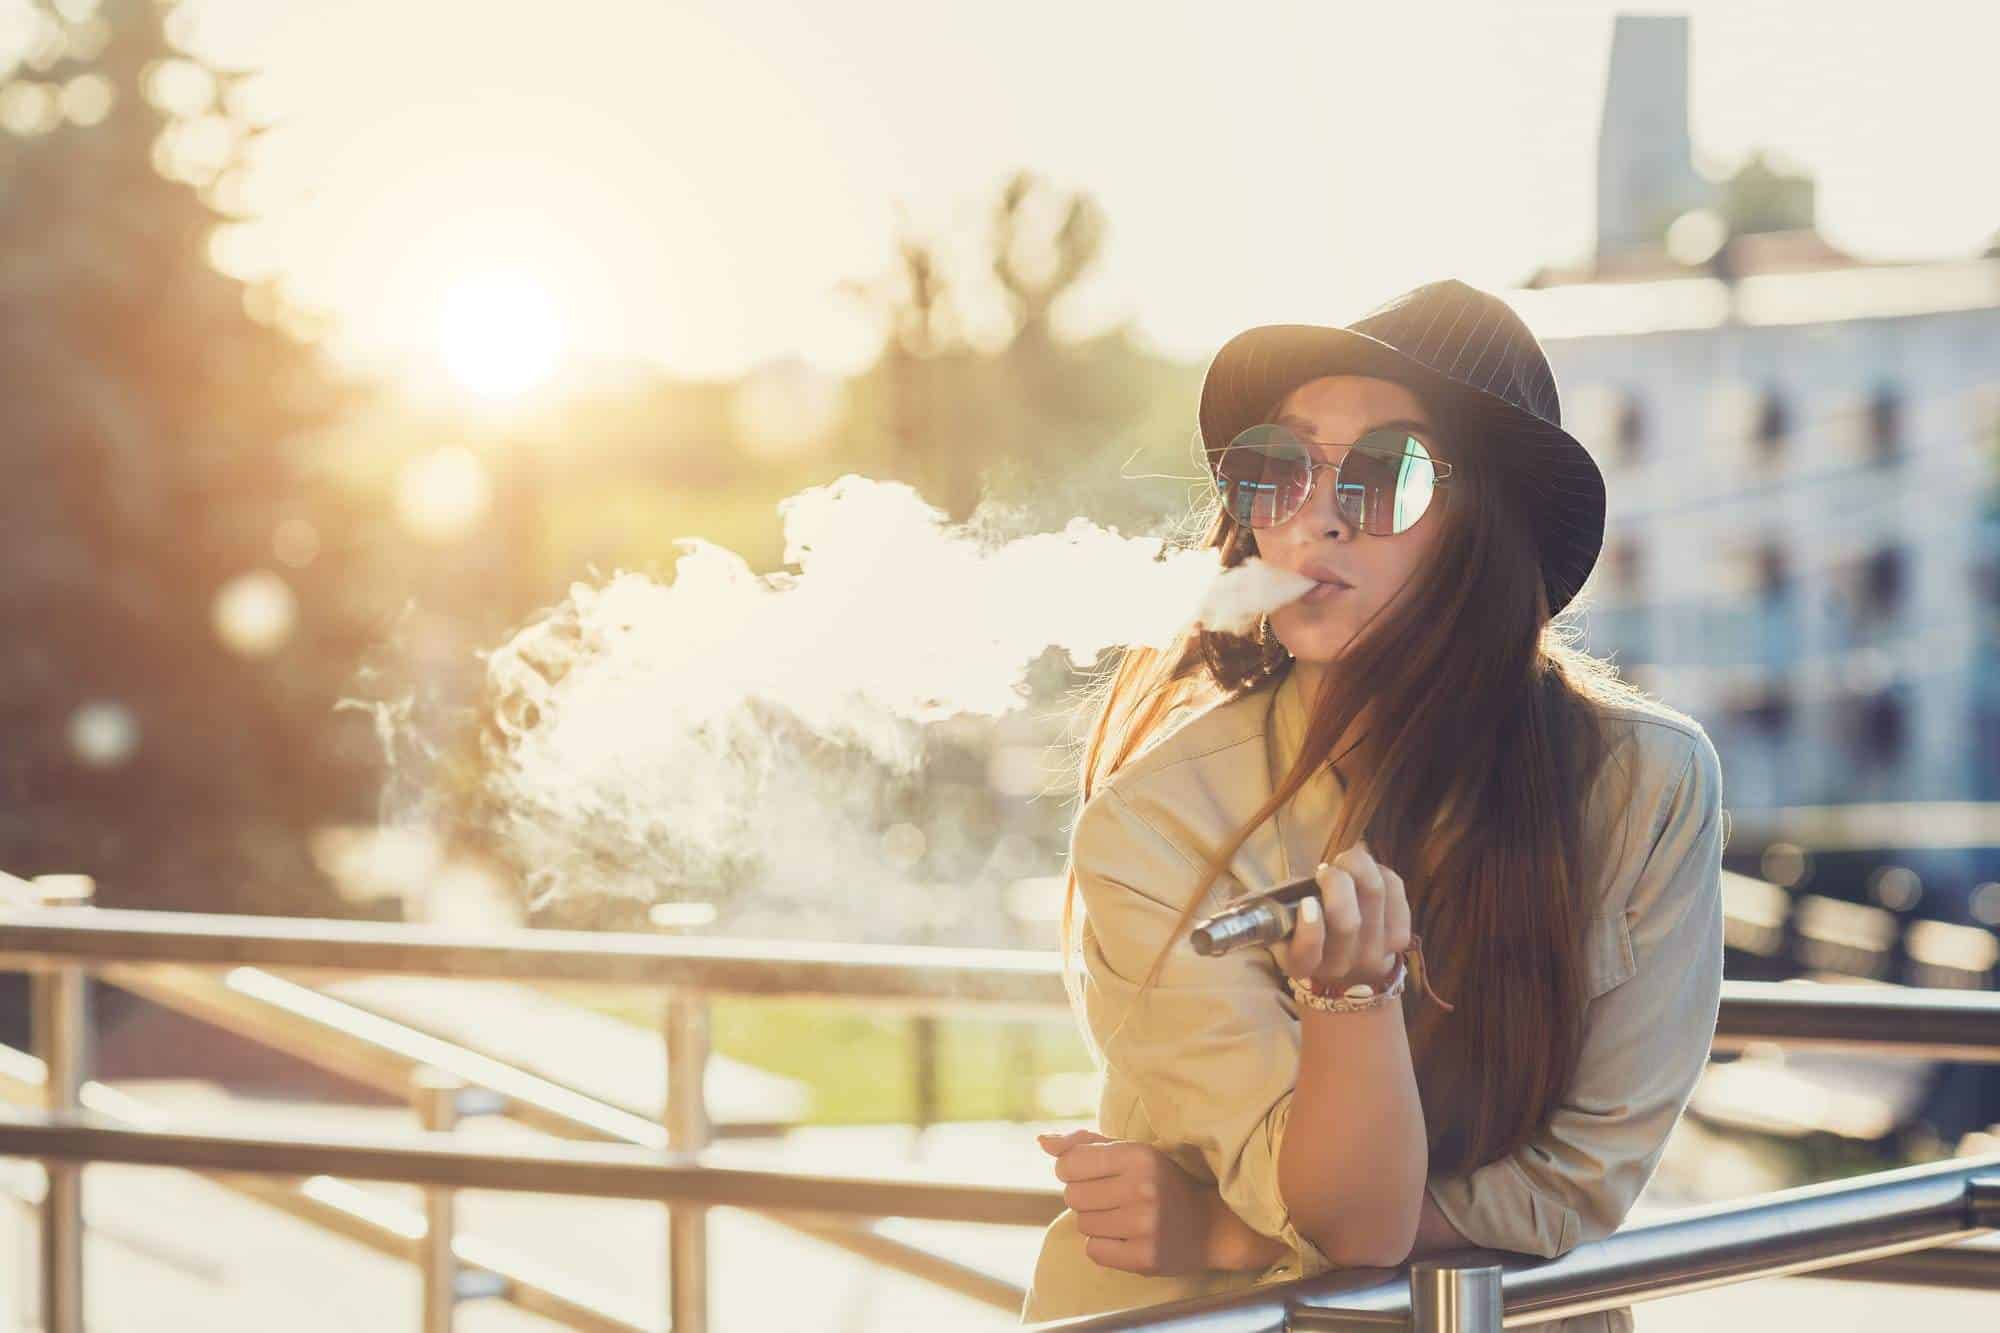 Premium eJuice vs. Regular eJuice: What's the Difference?